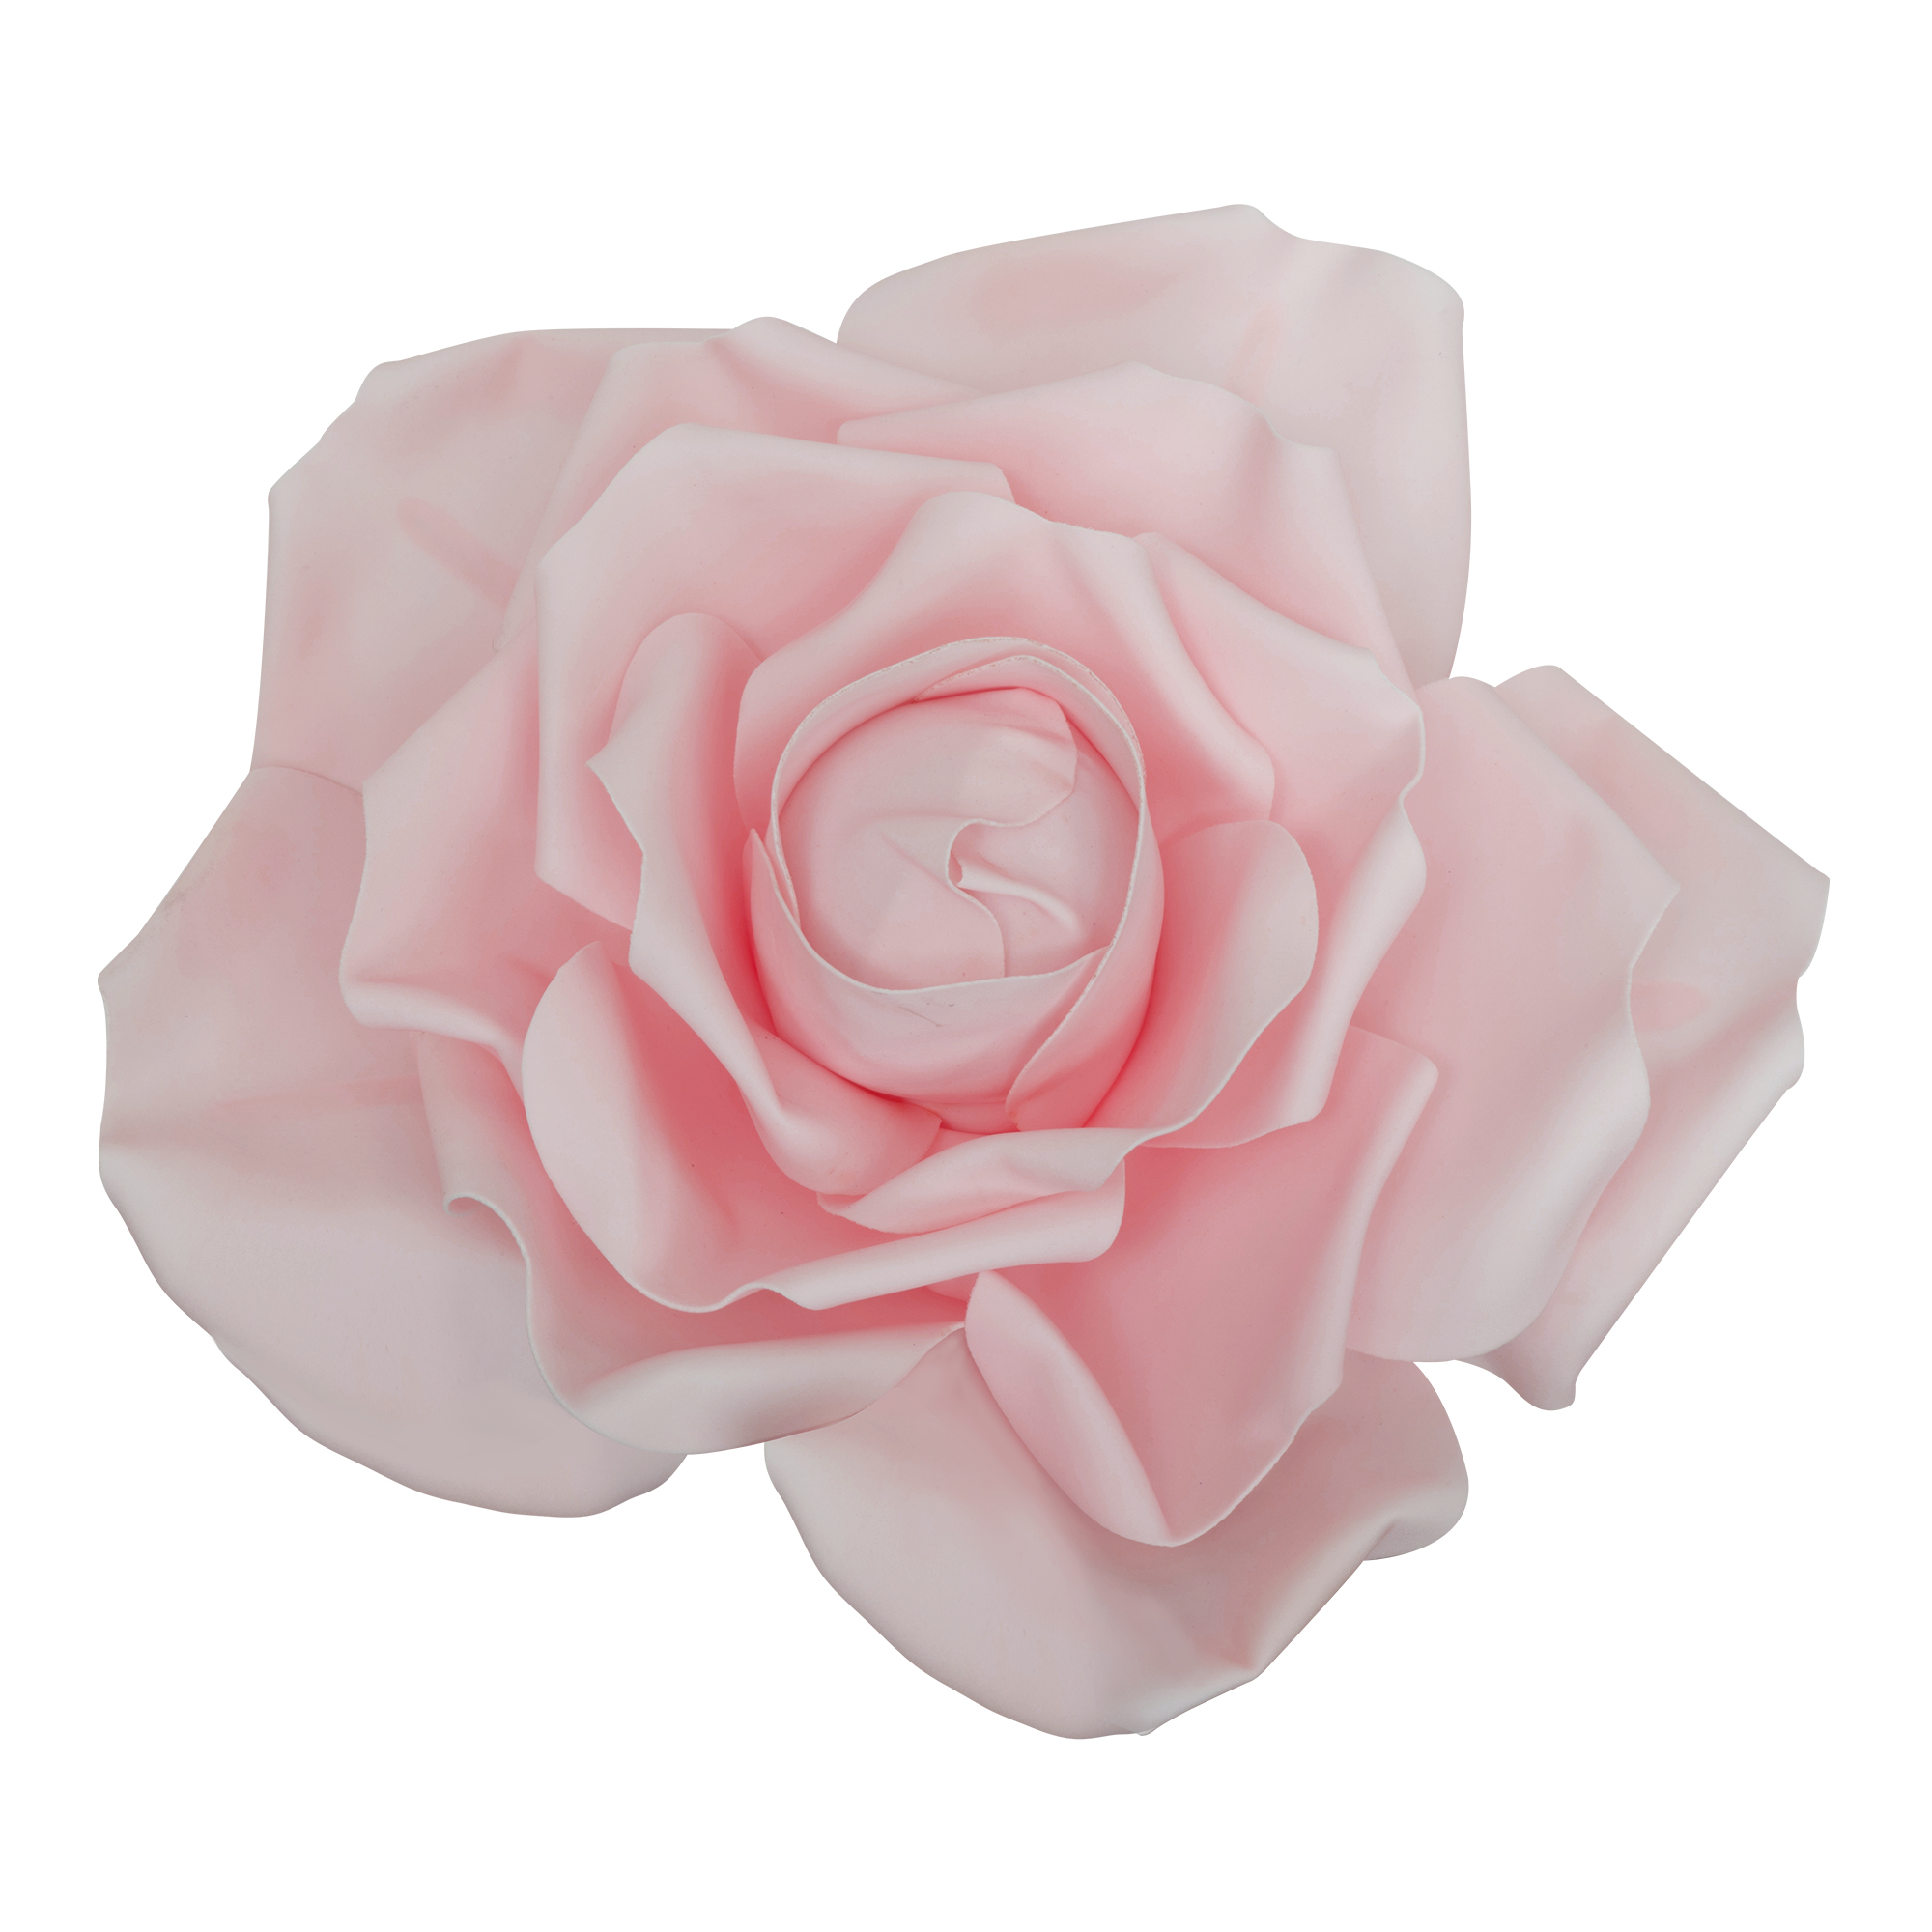 Foam Rose With LED Light 12" - Pink